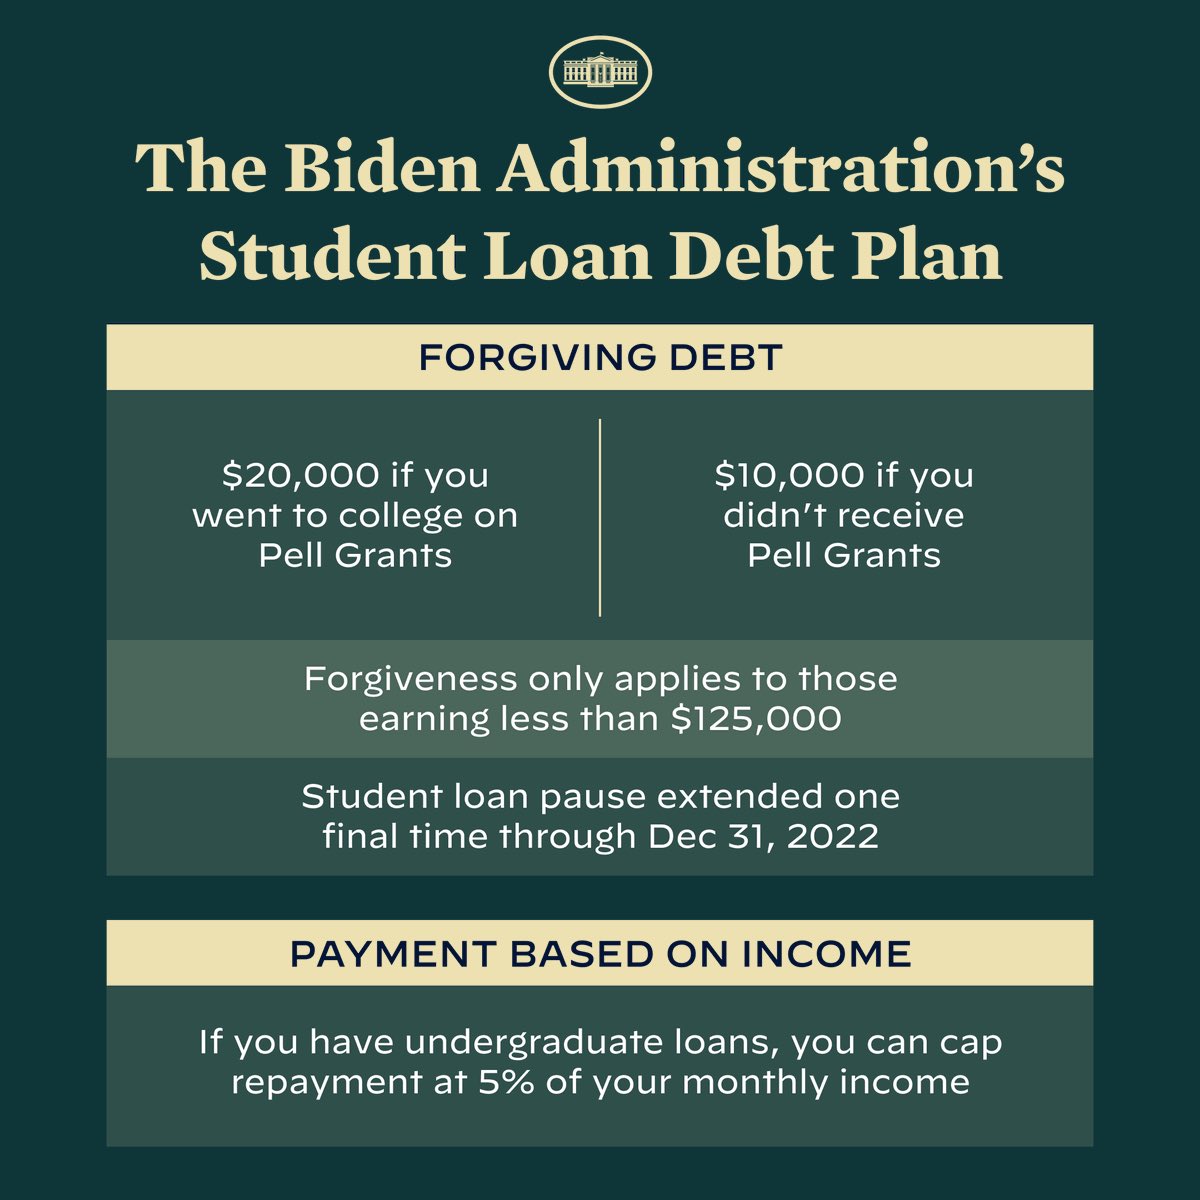 I have student loan debt too and Biden didn’t promise me anything I signed on the dotted line for my loan. You can be angry but lying is not okay and neither is telling people to not VOTE over this. Republicans are suing over cancellation. Go smear SCOTUS and Republicans.